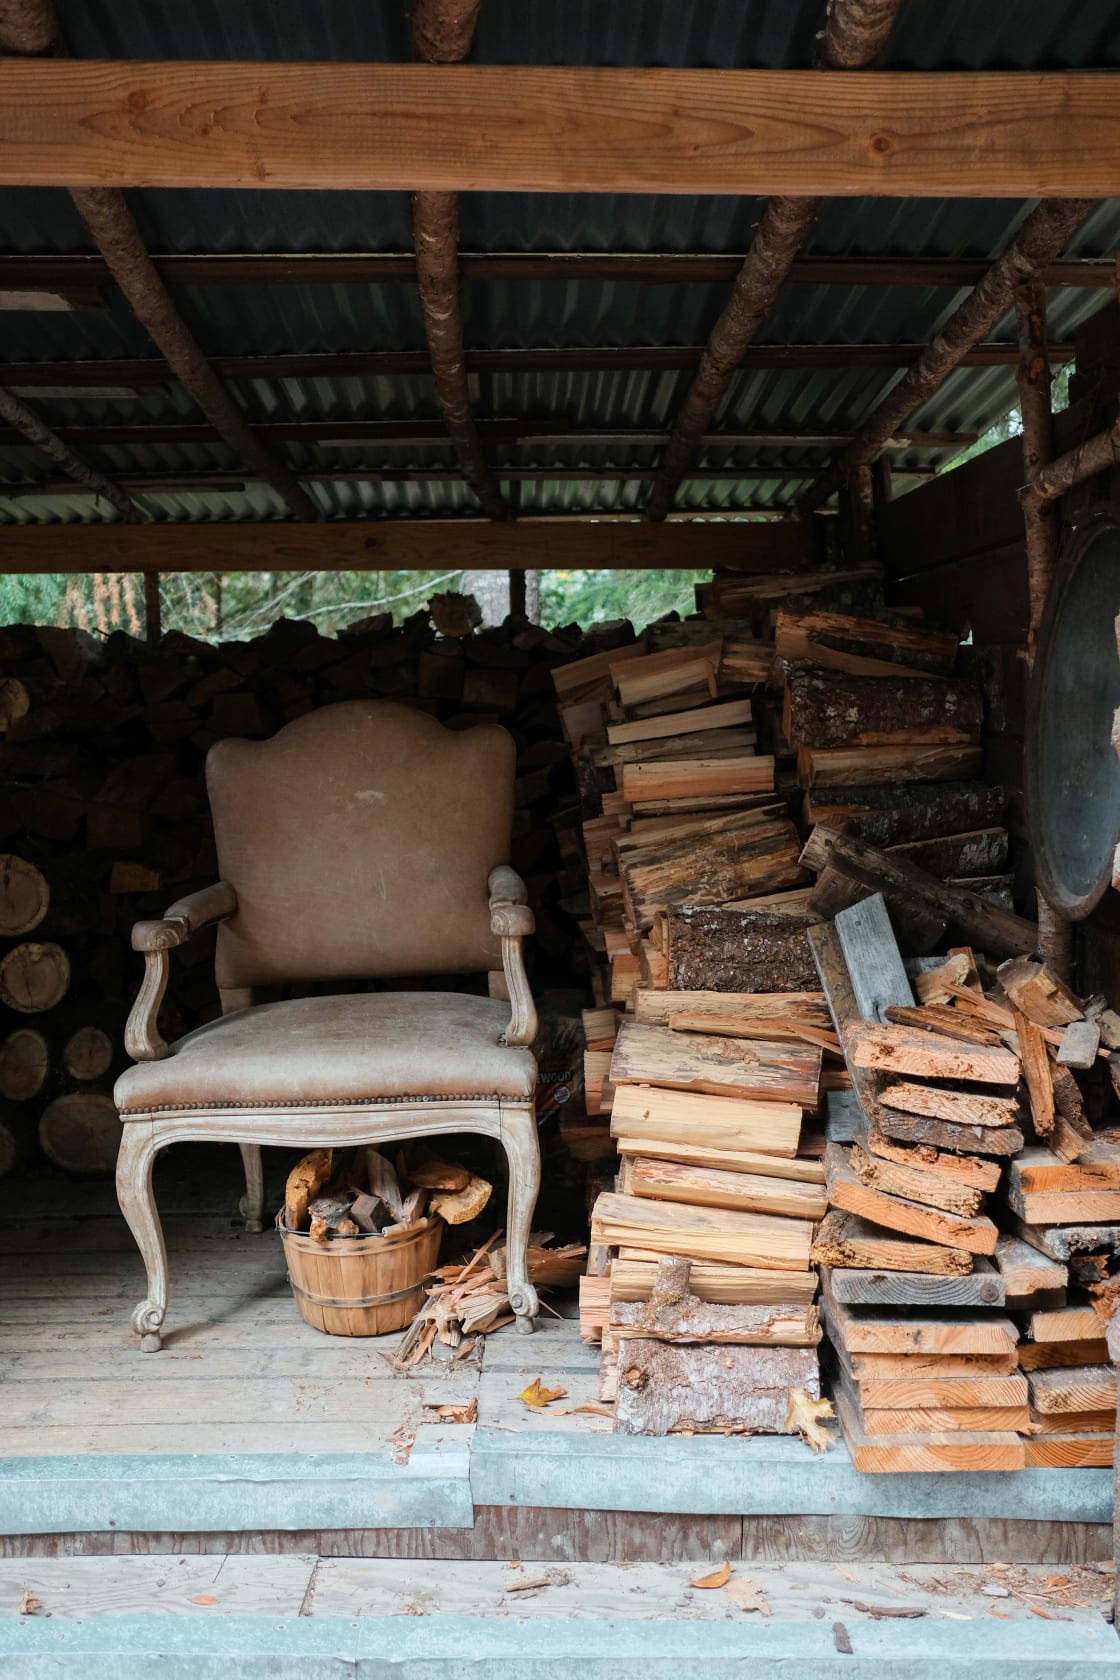 The firewood supply. 